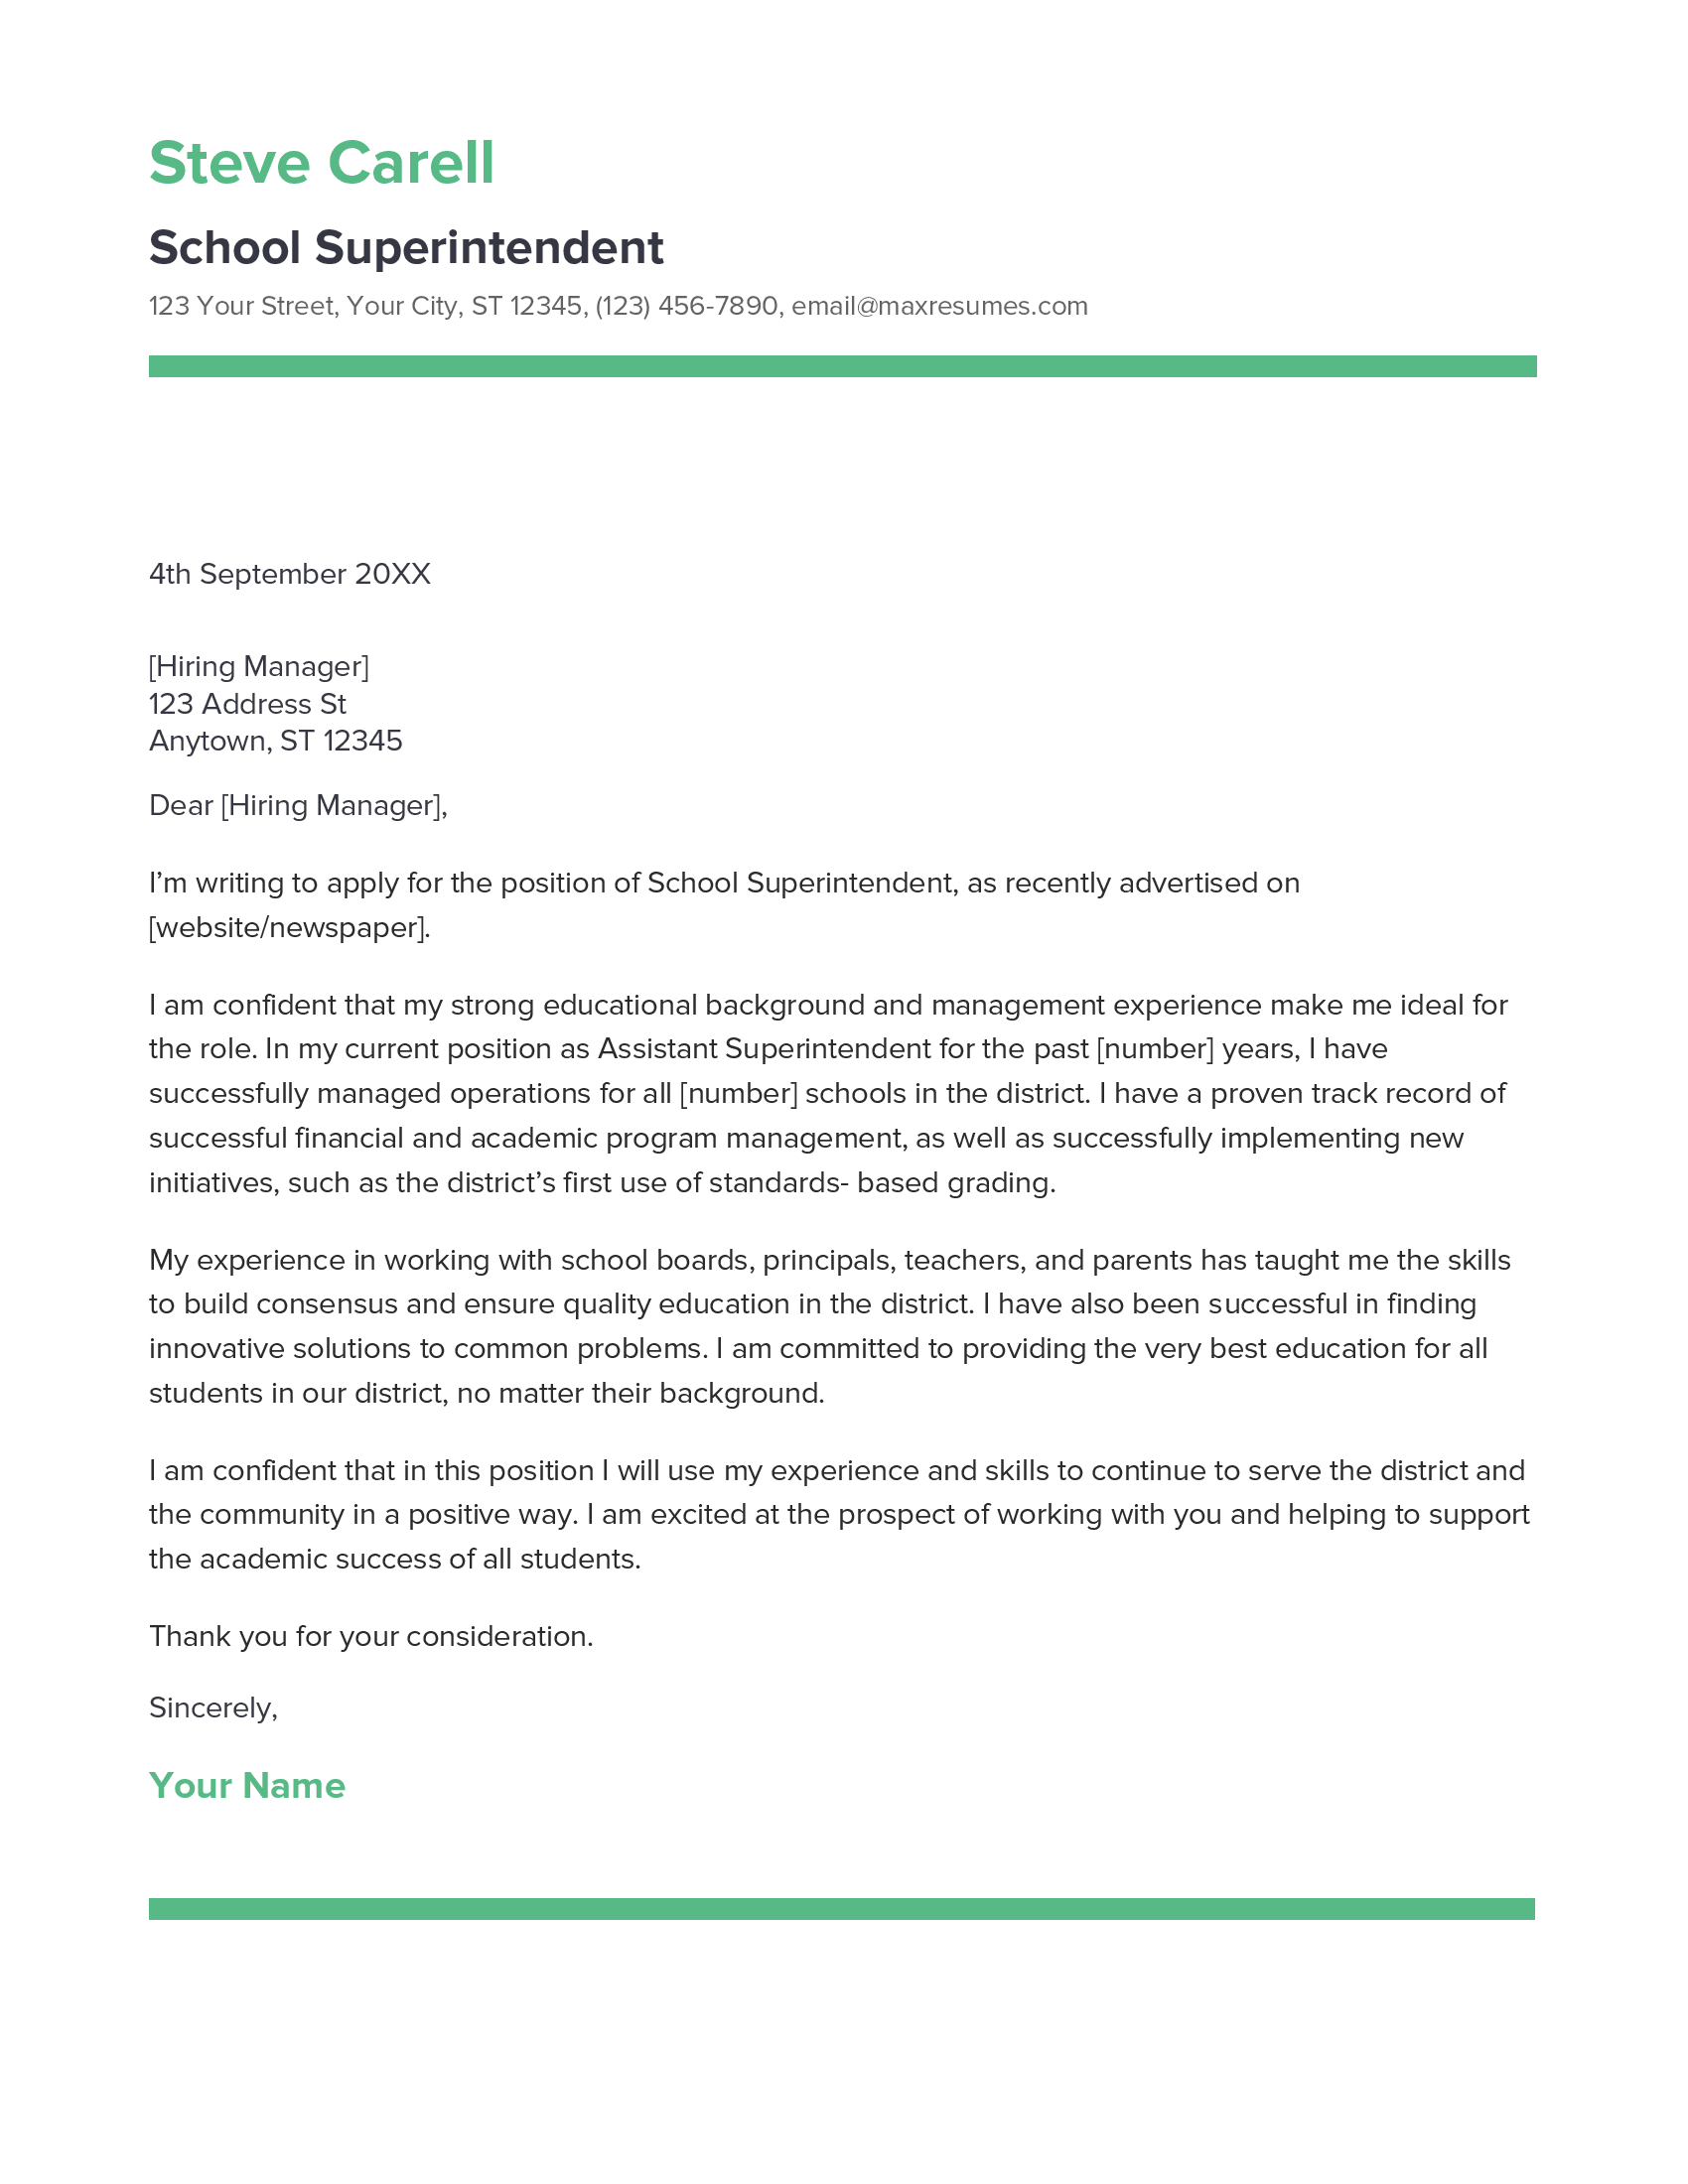 School Superintendent Cover Letter Example